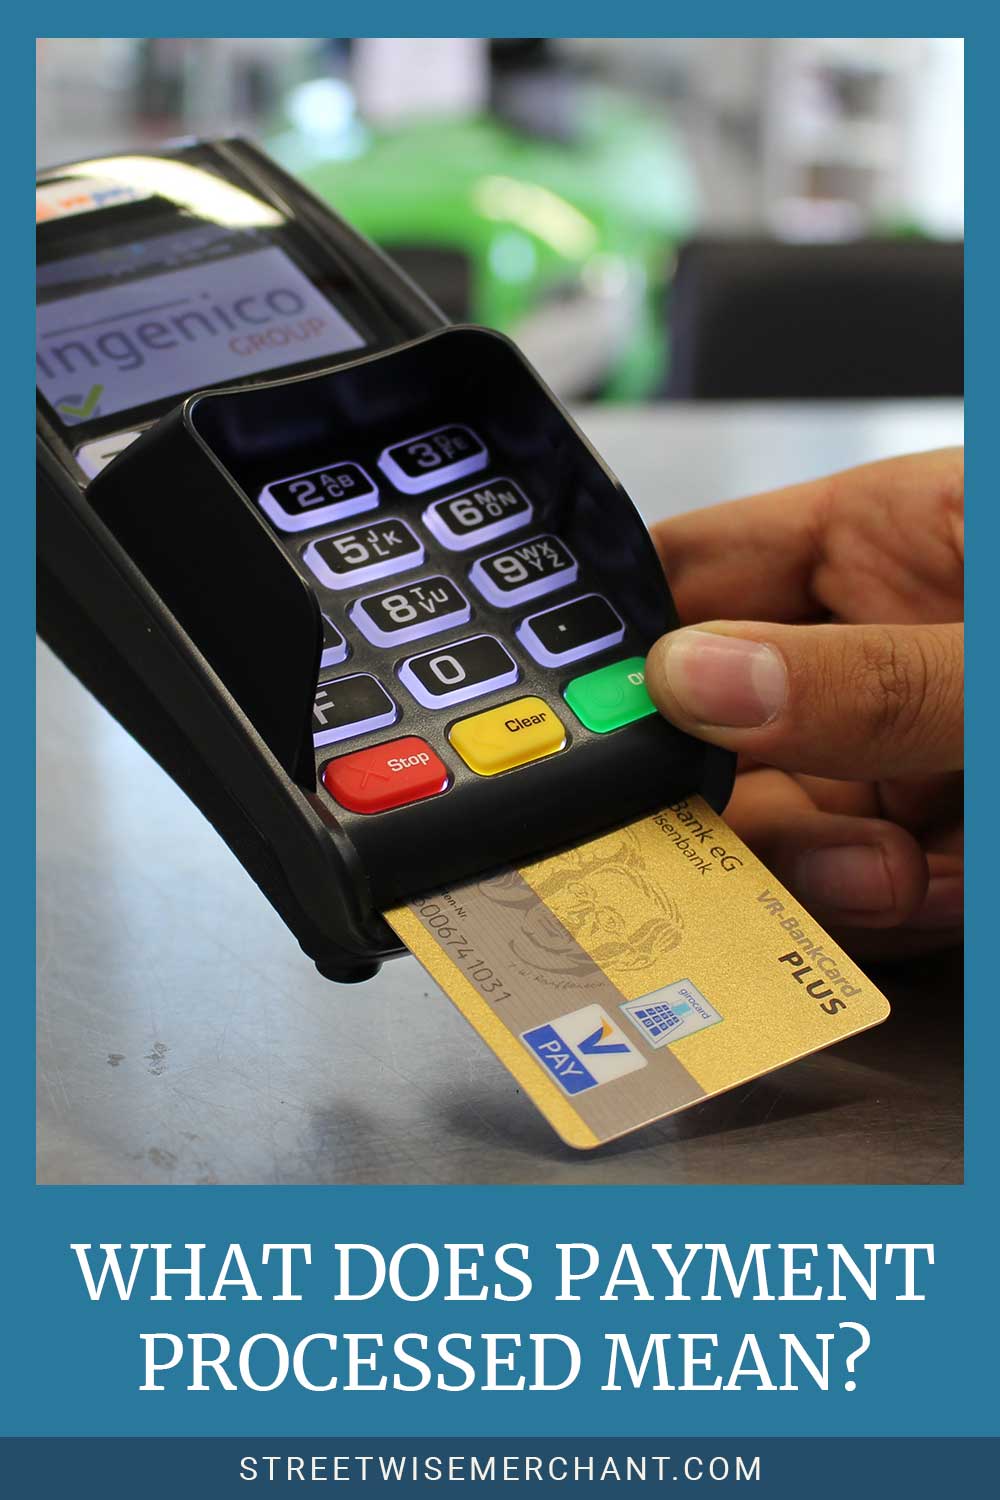 Someone holding a credit card machine and a card in it - What Does Payment Processed Mean?